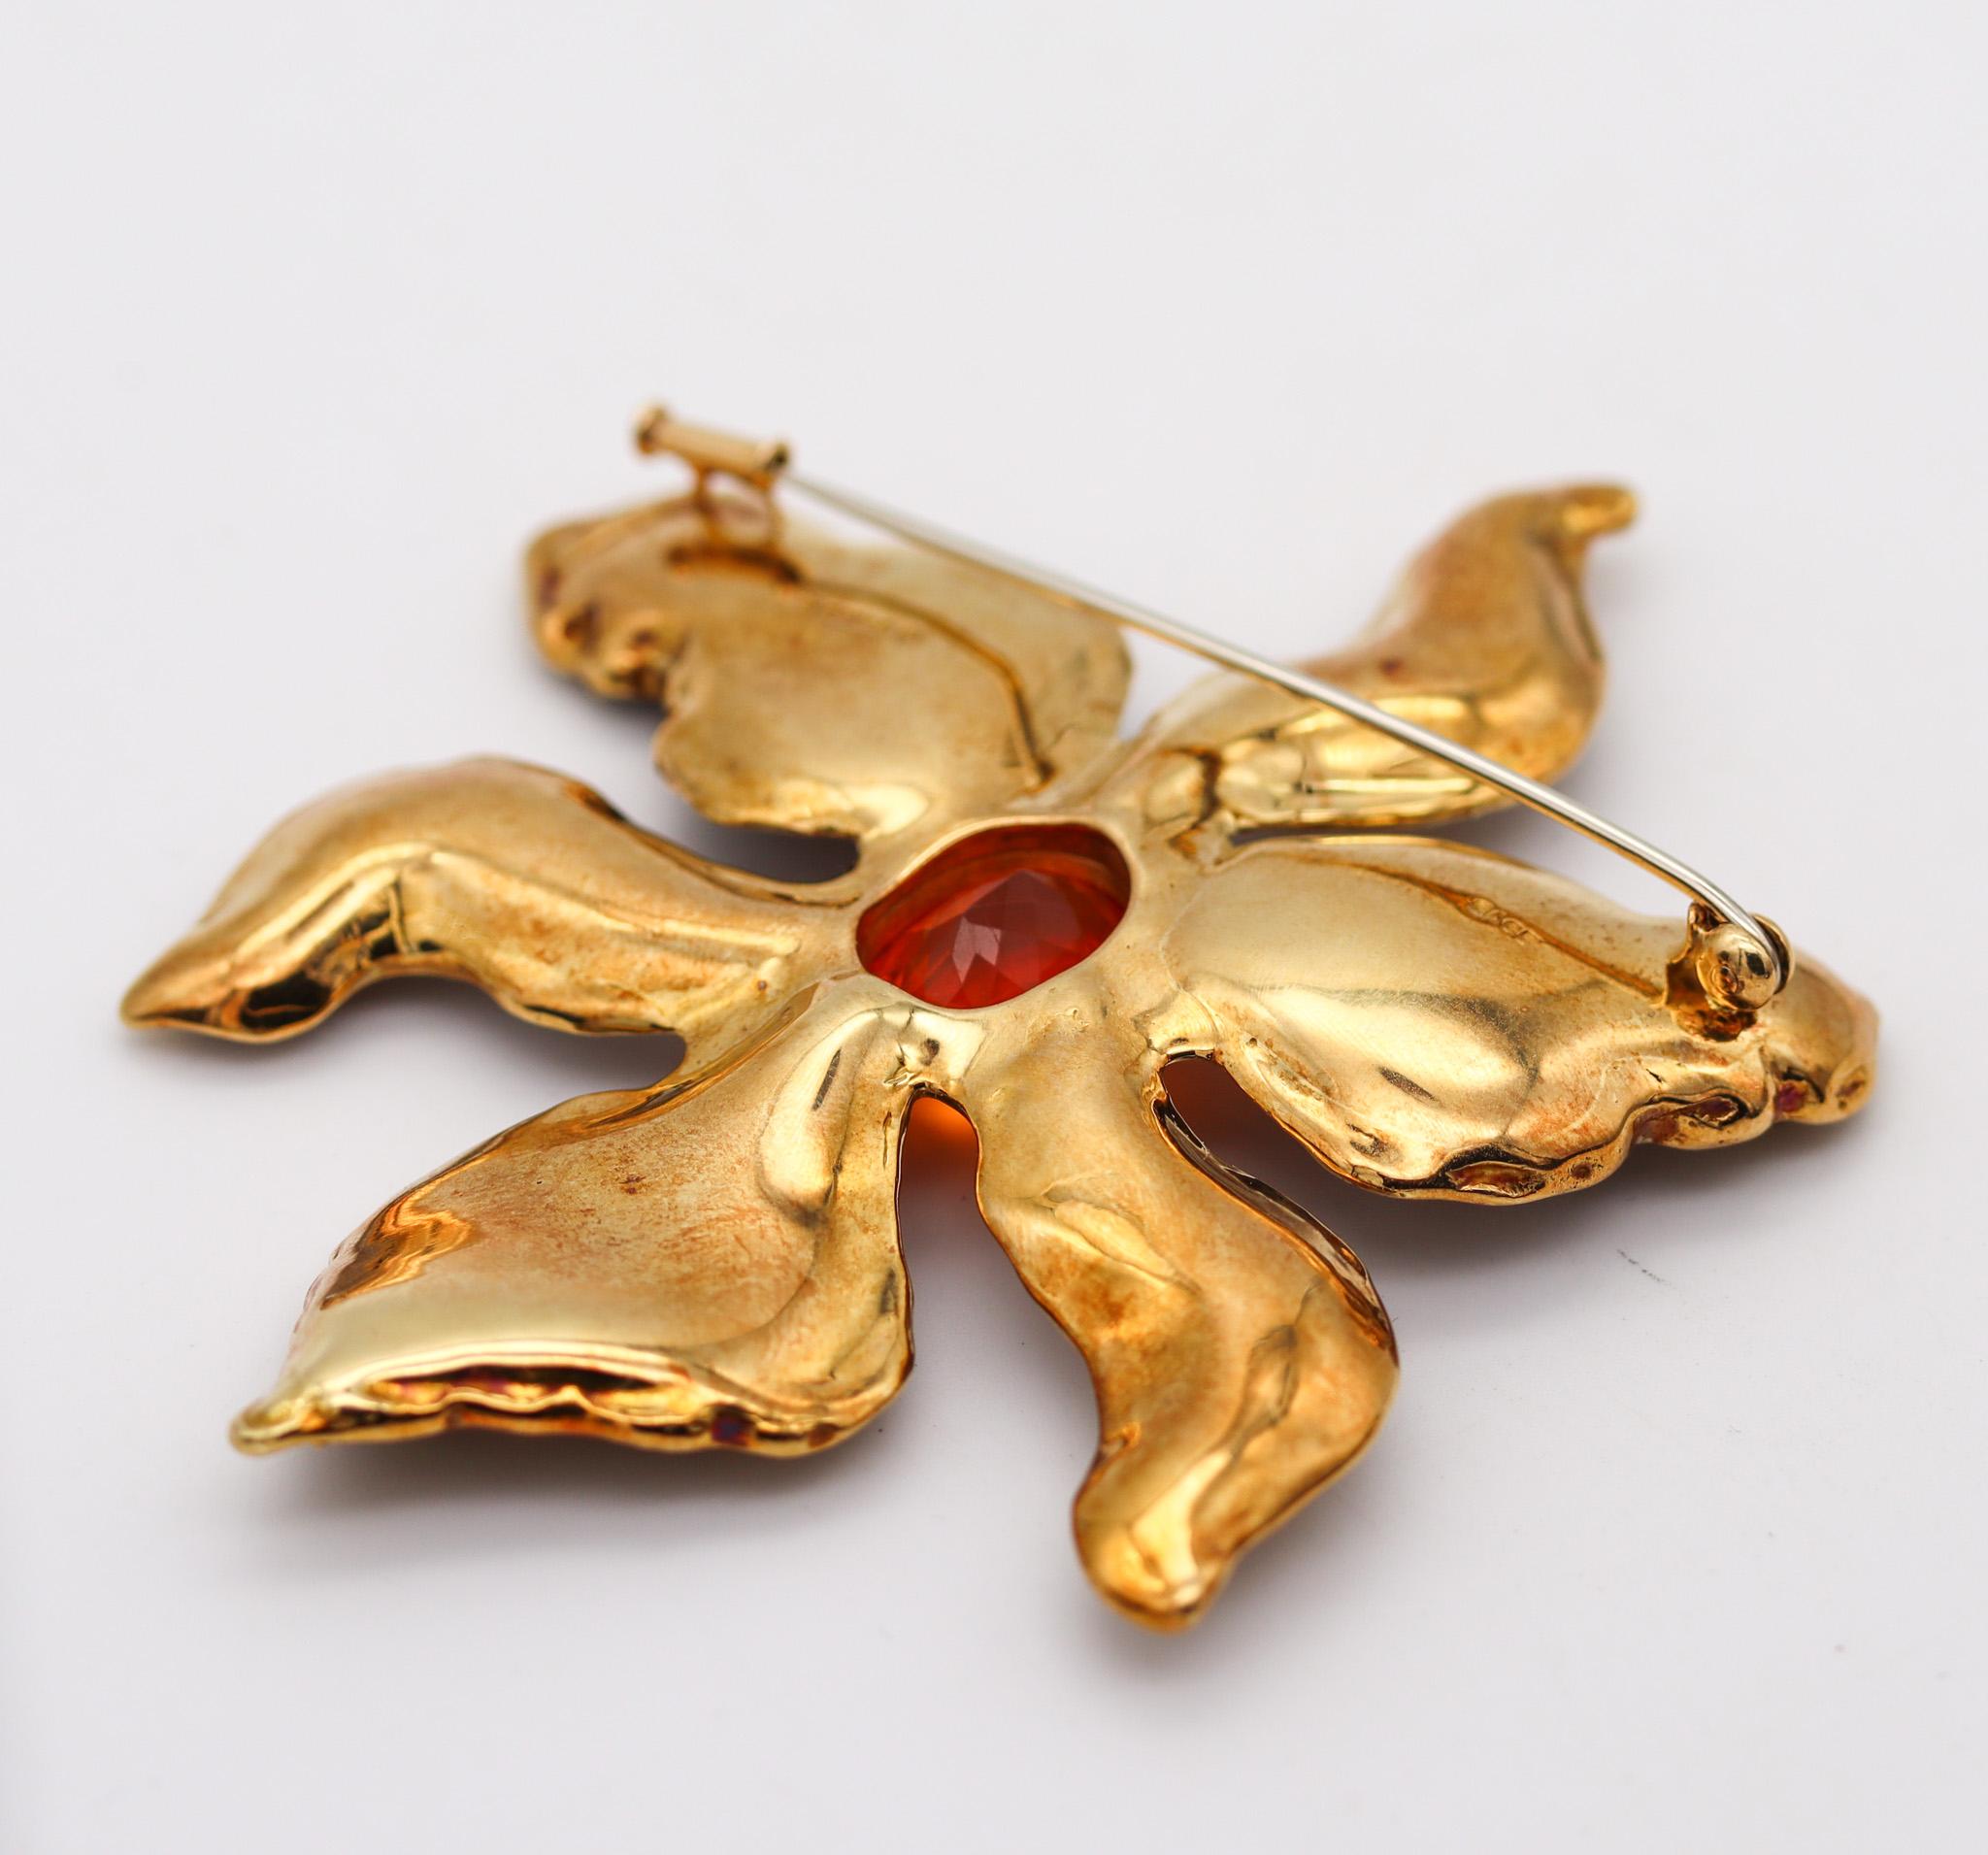 Oval Cut Elizabeth Gage 1994 London Orchid Agate Pendant Brooch 18Kt Gold With Fire Opal For Sale